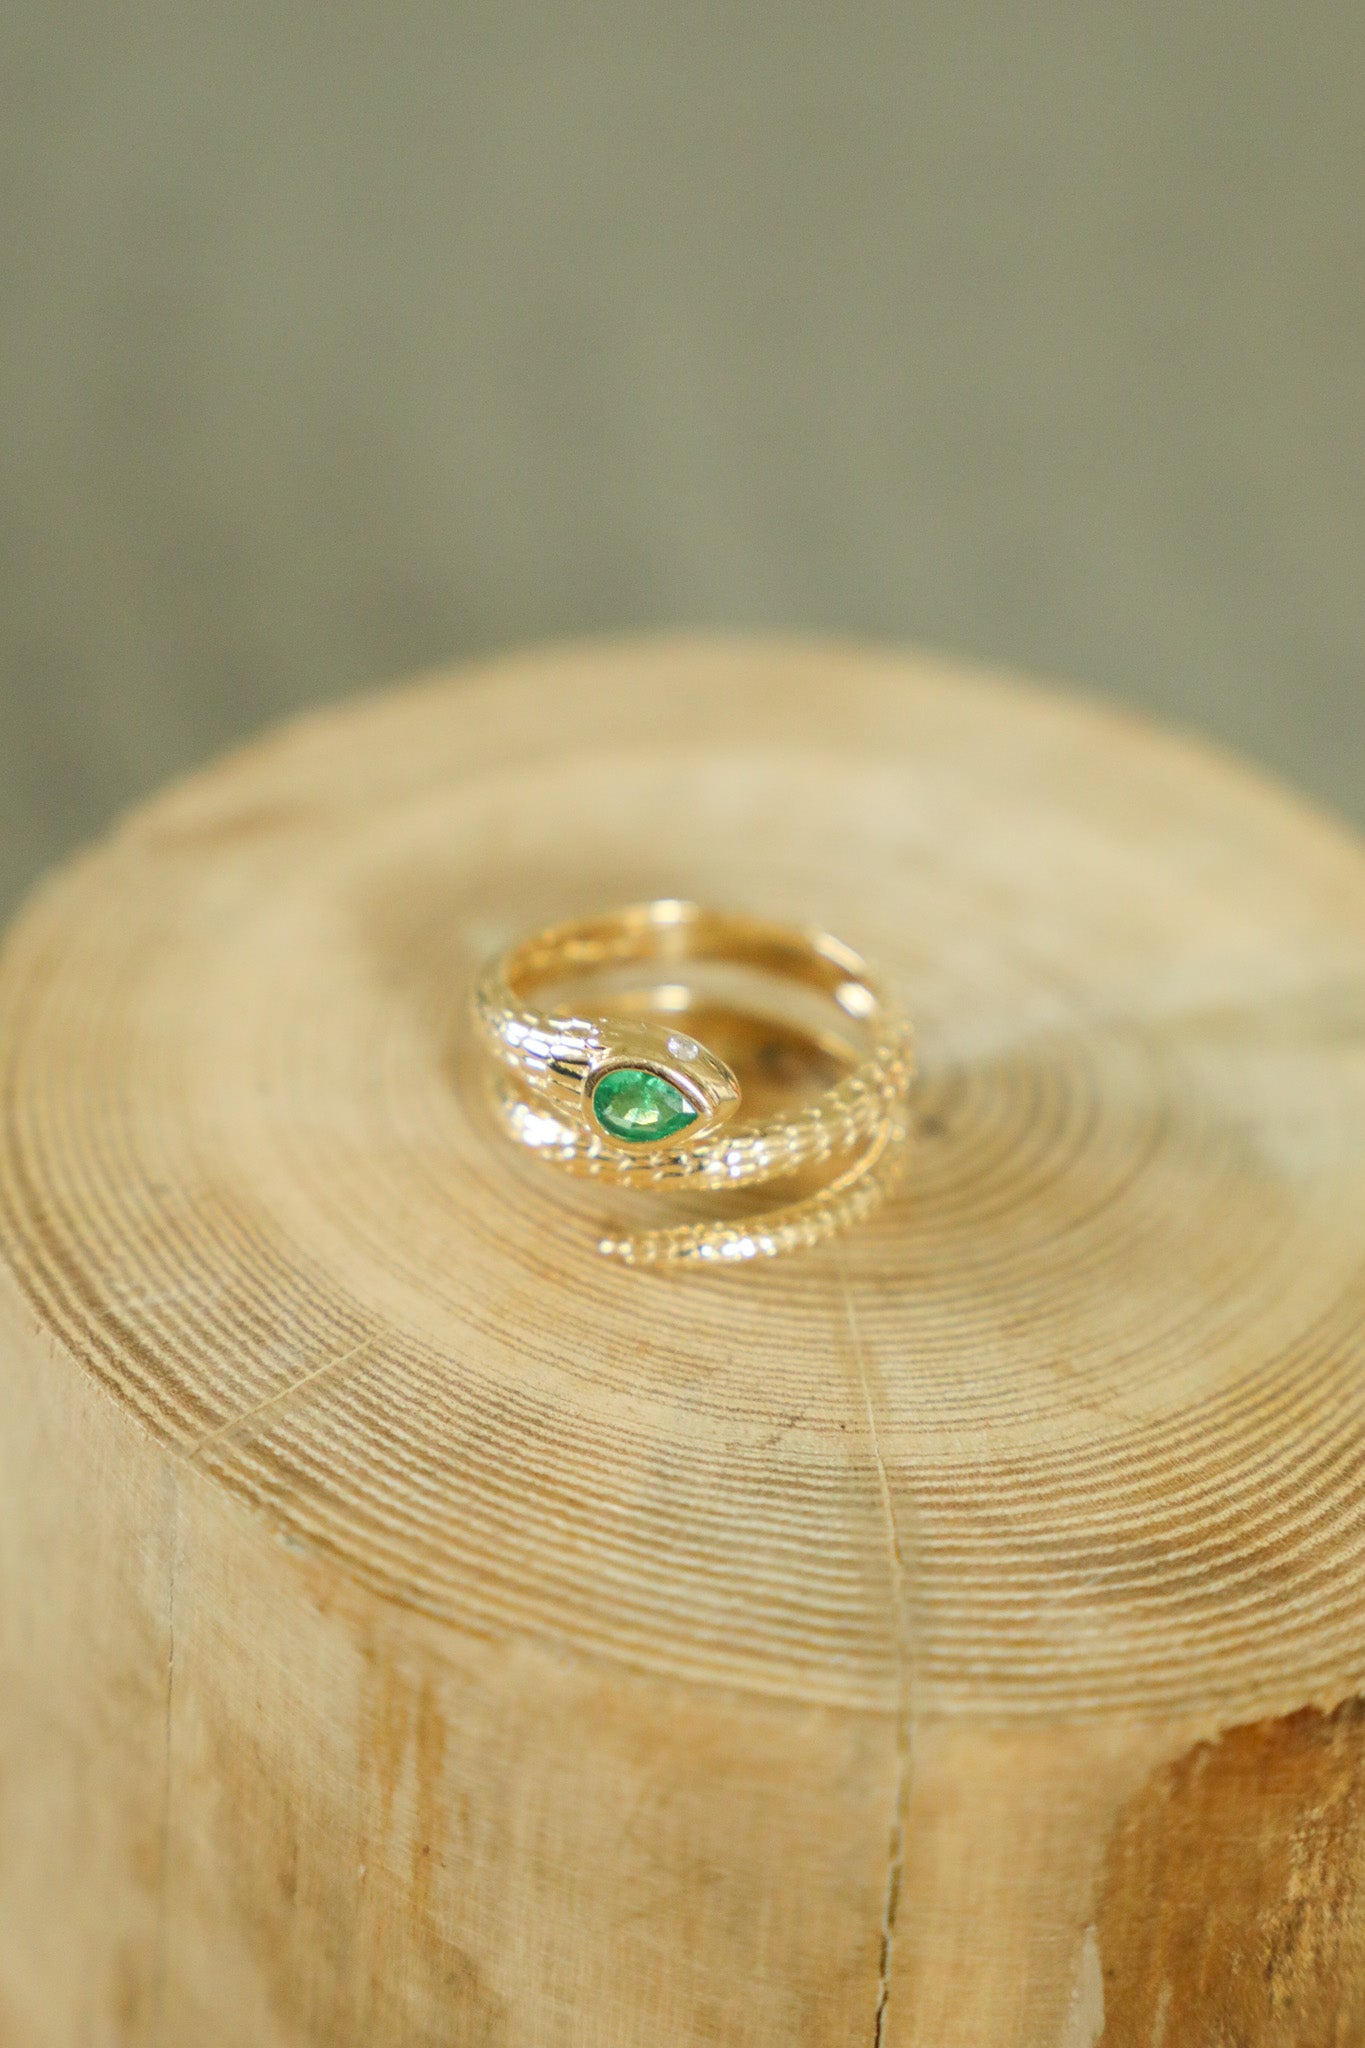 R007 - 14k YG Size 7 Snake Coil Band Ring w/1 Pear Shaped Emerald (0.28cts) & 2 Diamonds (0.03cts)